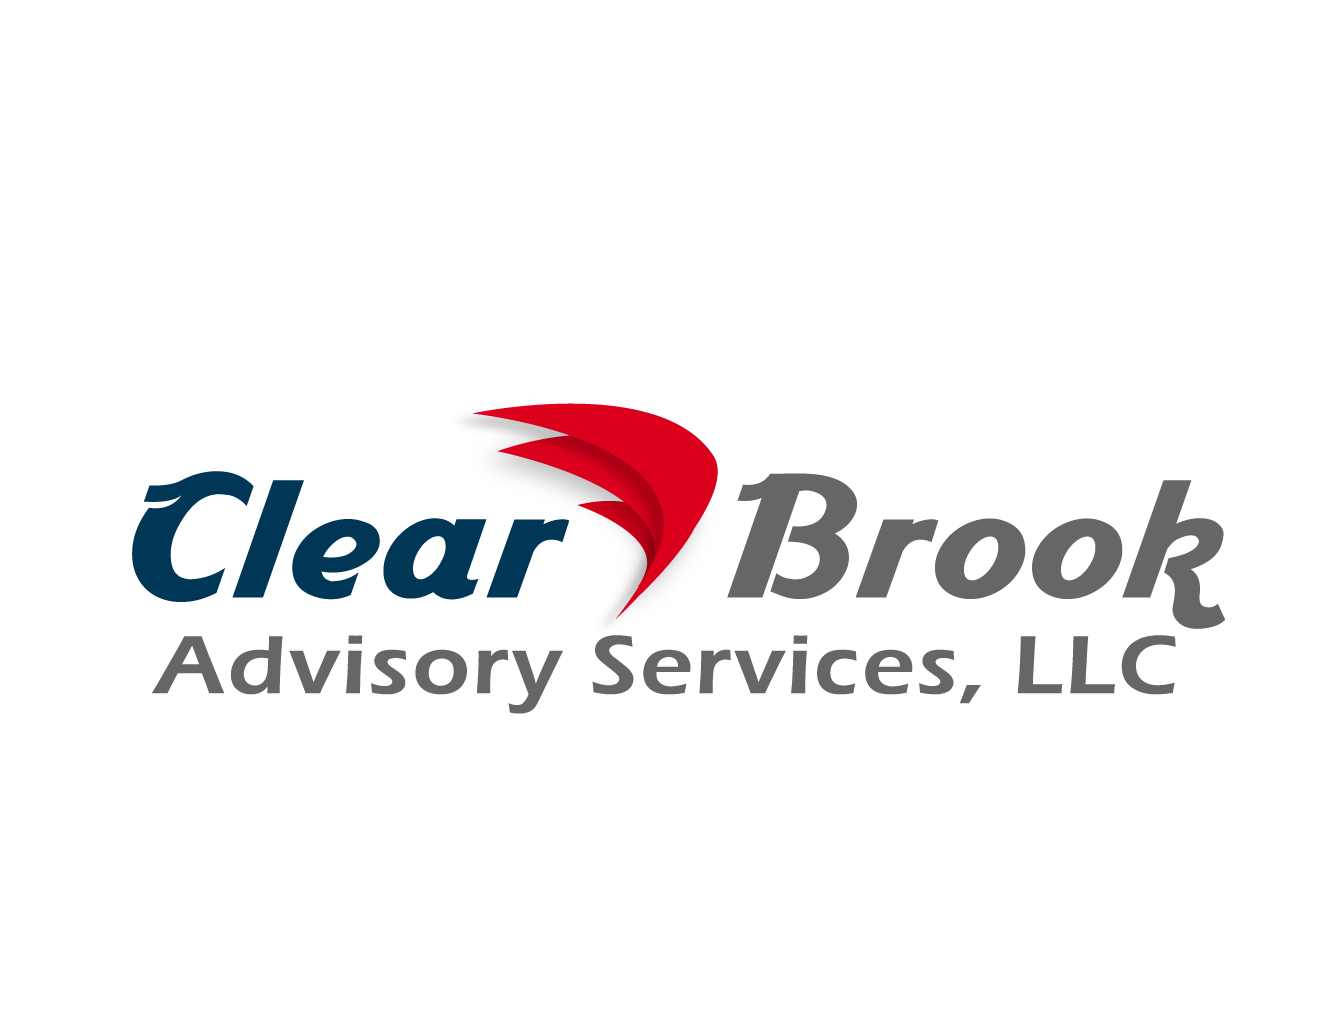 Clearbrook Logo - Logo Design for ClearBrook Advisory Services, LLC